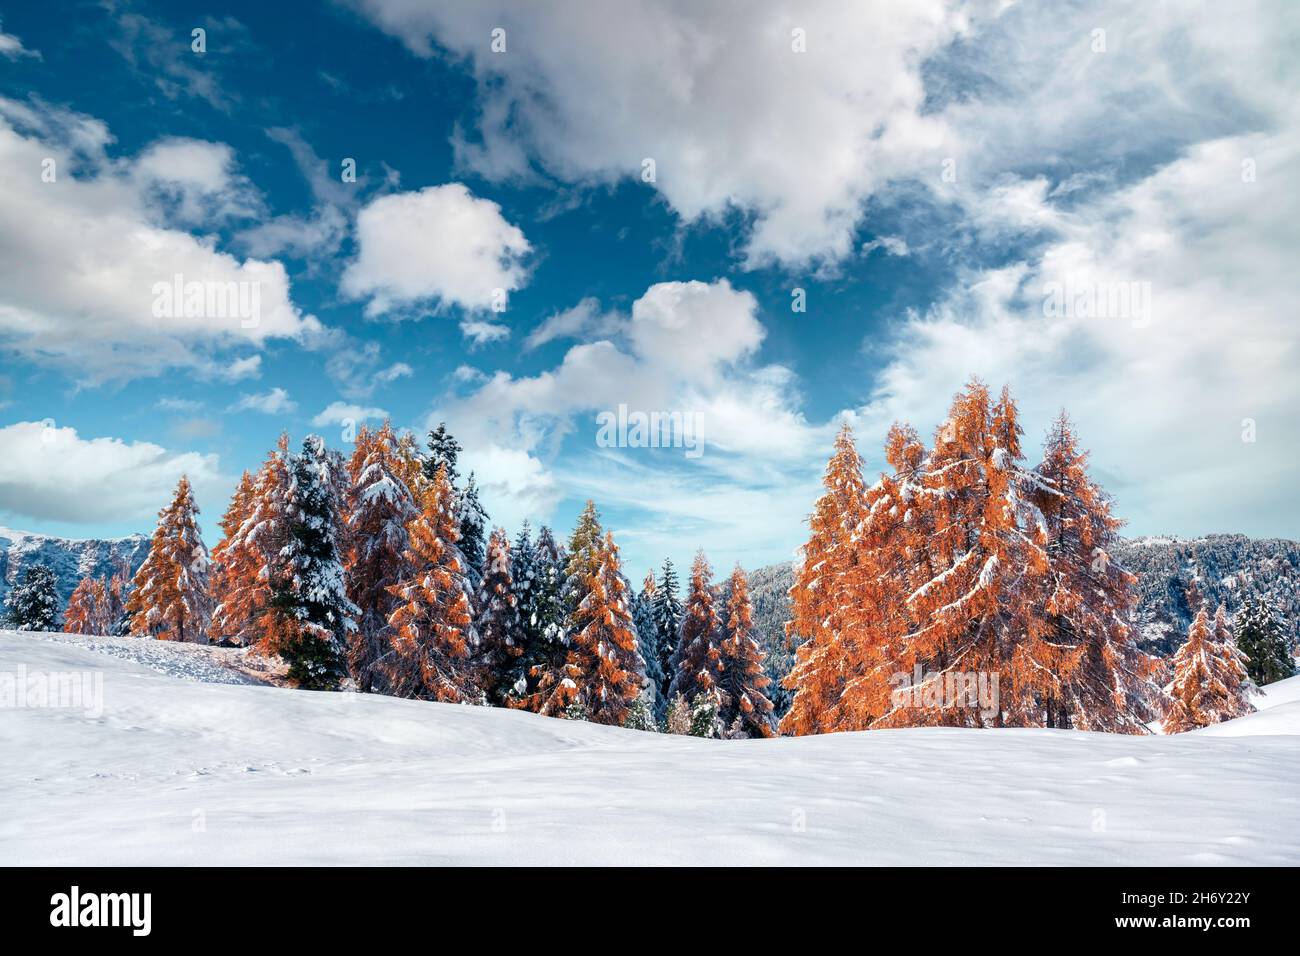 Picturesque landscape with orange larches covered by first snow on meadow Alpe di Siusi, Seiser Alm, Dolomites, Italy. Snowy mountains peaks on background Stock Photo